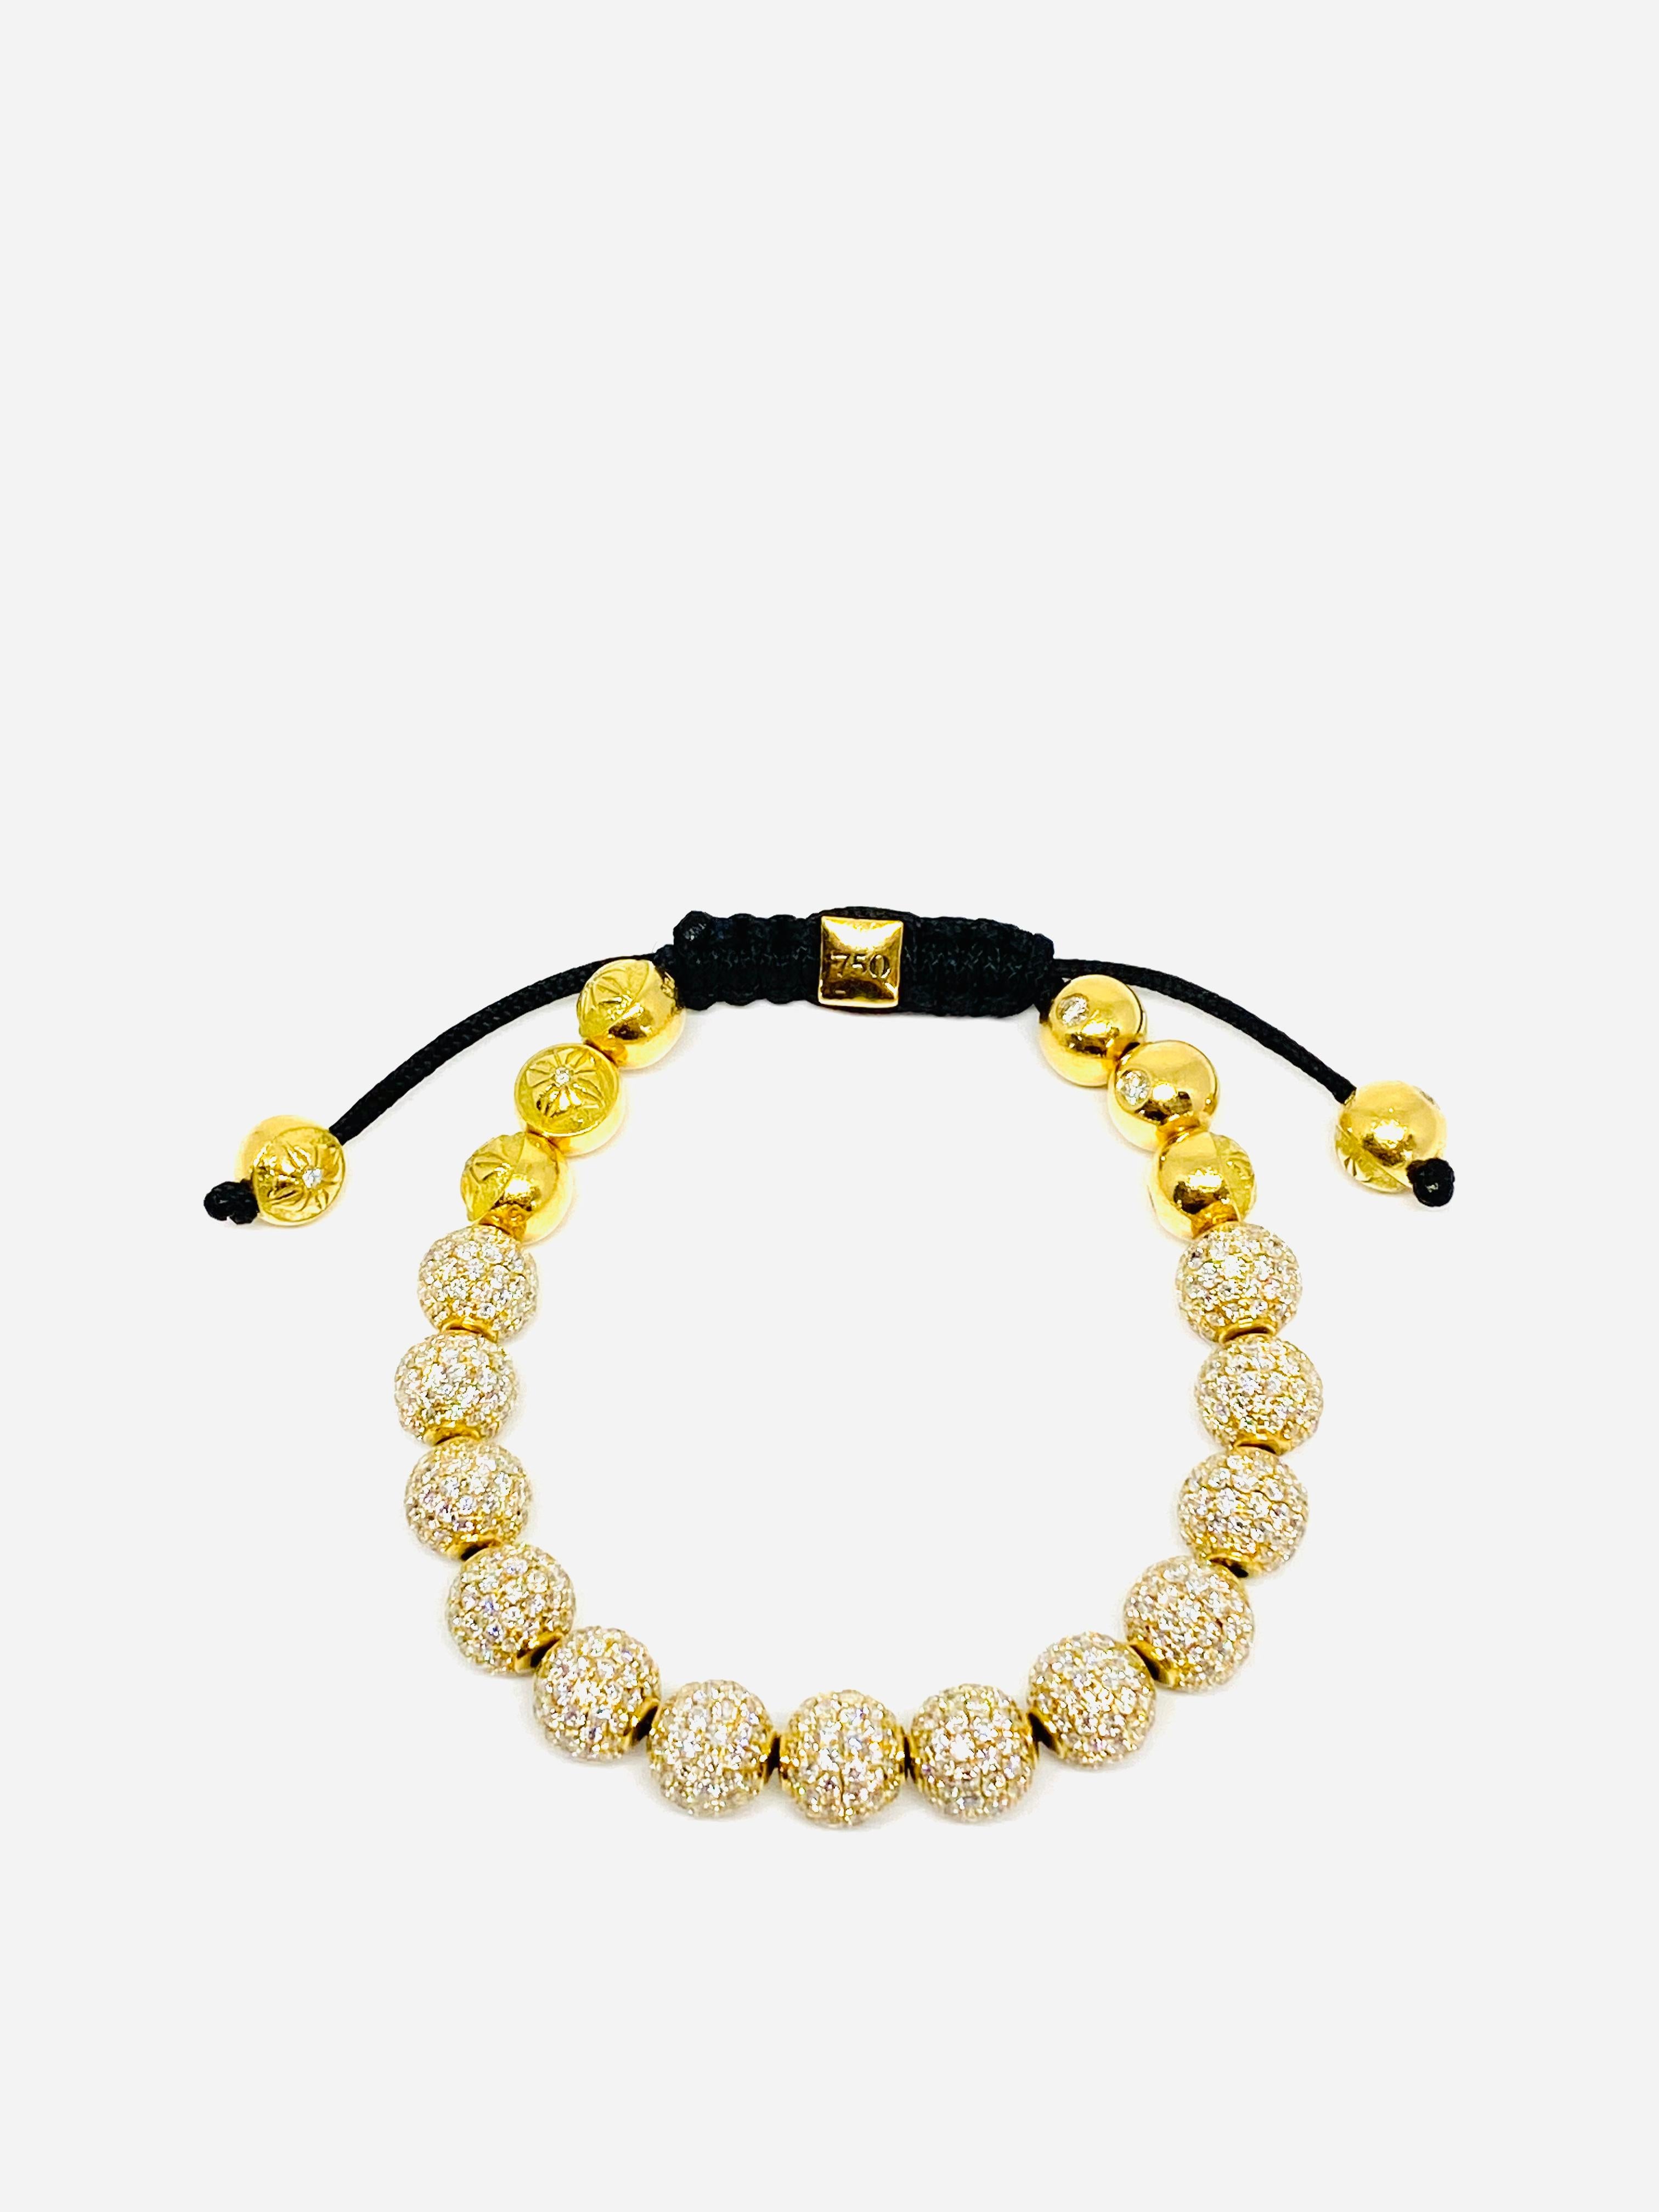 
SHAMBALLA Jewels 6mm Non- Braided 18K Yellow Gold and 9.5 ct Diamond Beads Bracelet

Product details:
All beads are made by hand
Star of Shamballa beads are pave diamond setting (total of 8; 3 on each side and 1 on each end of the bracelet)
Braided